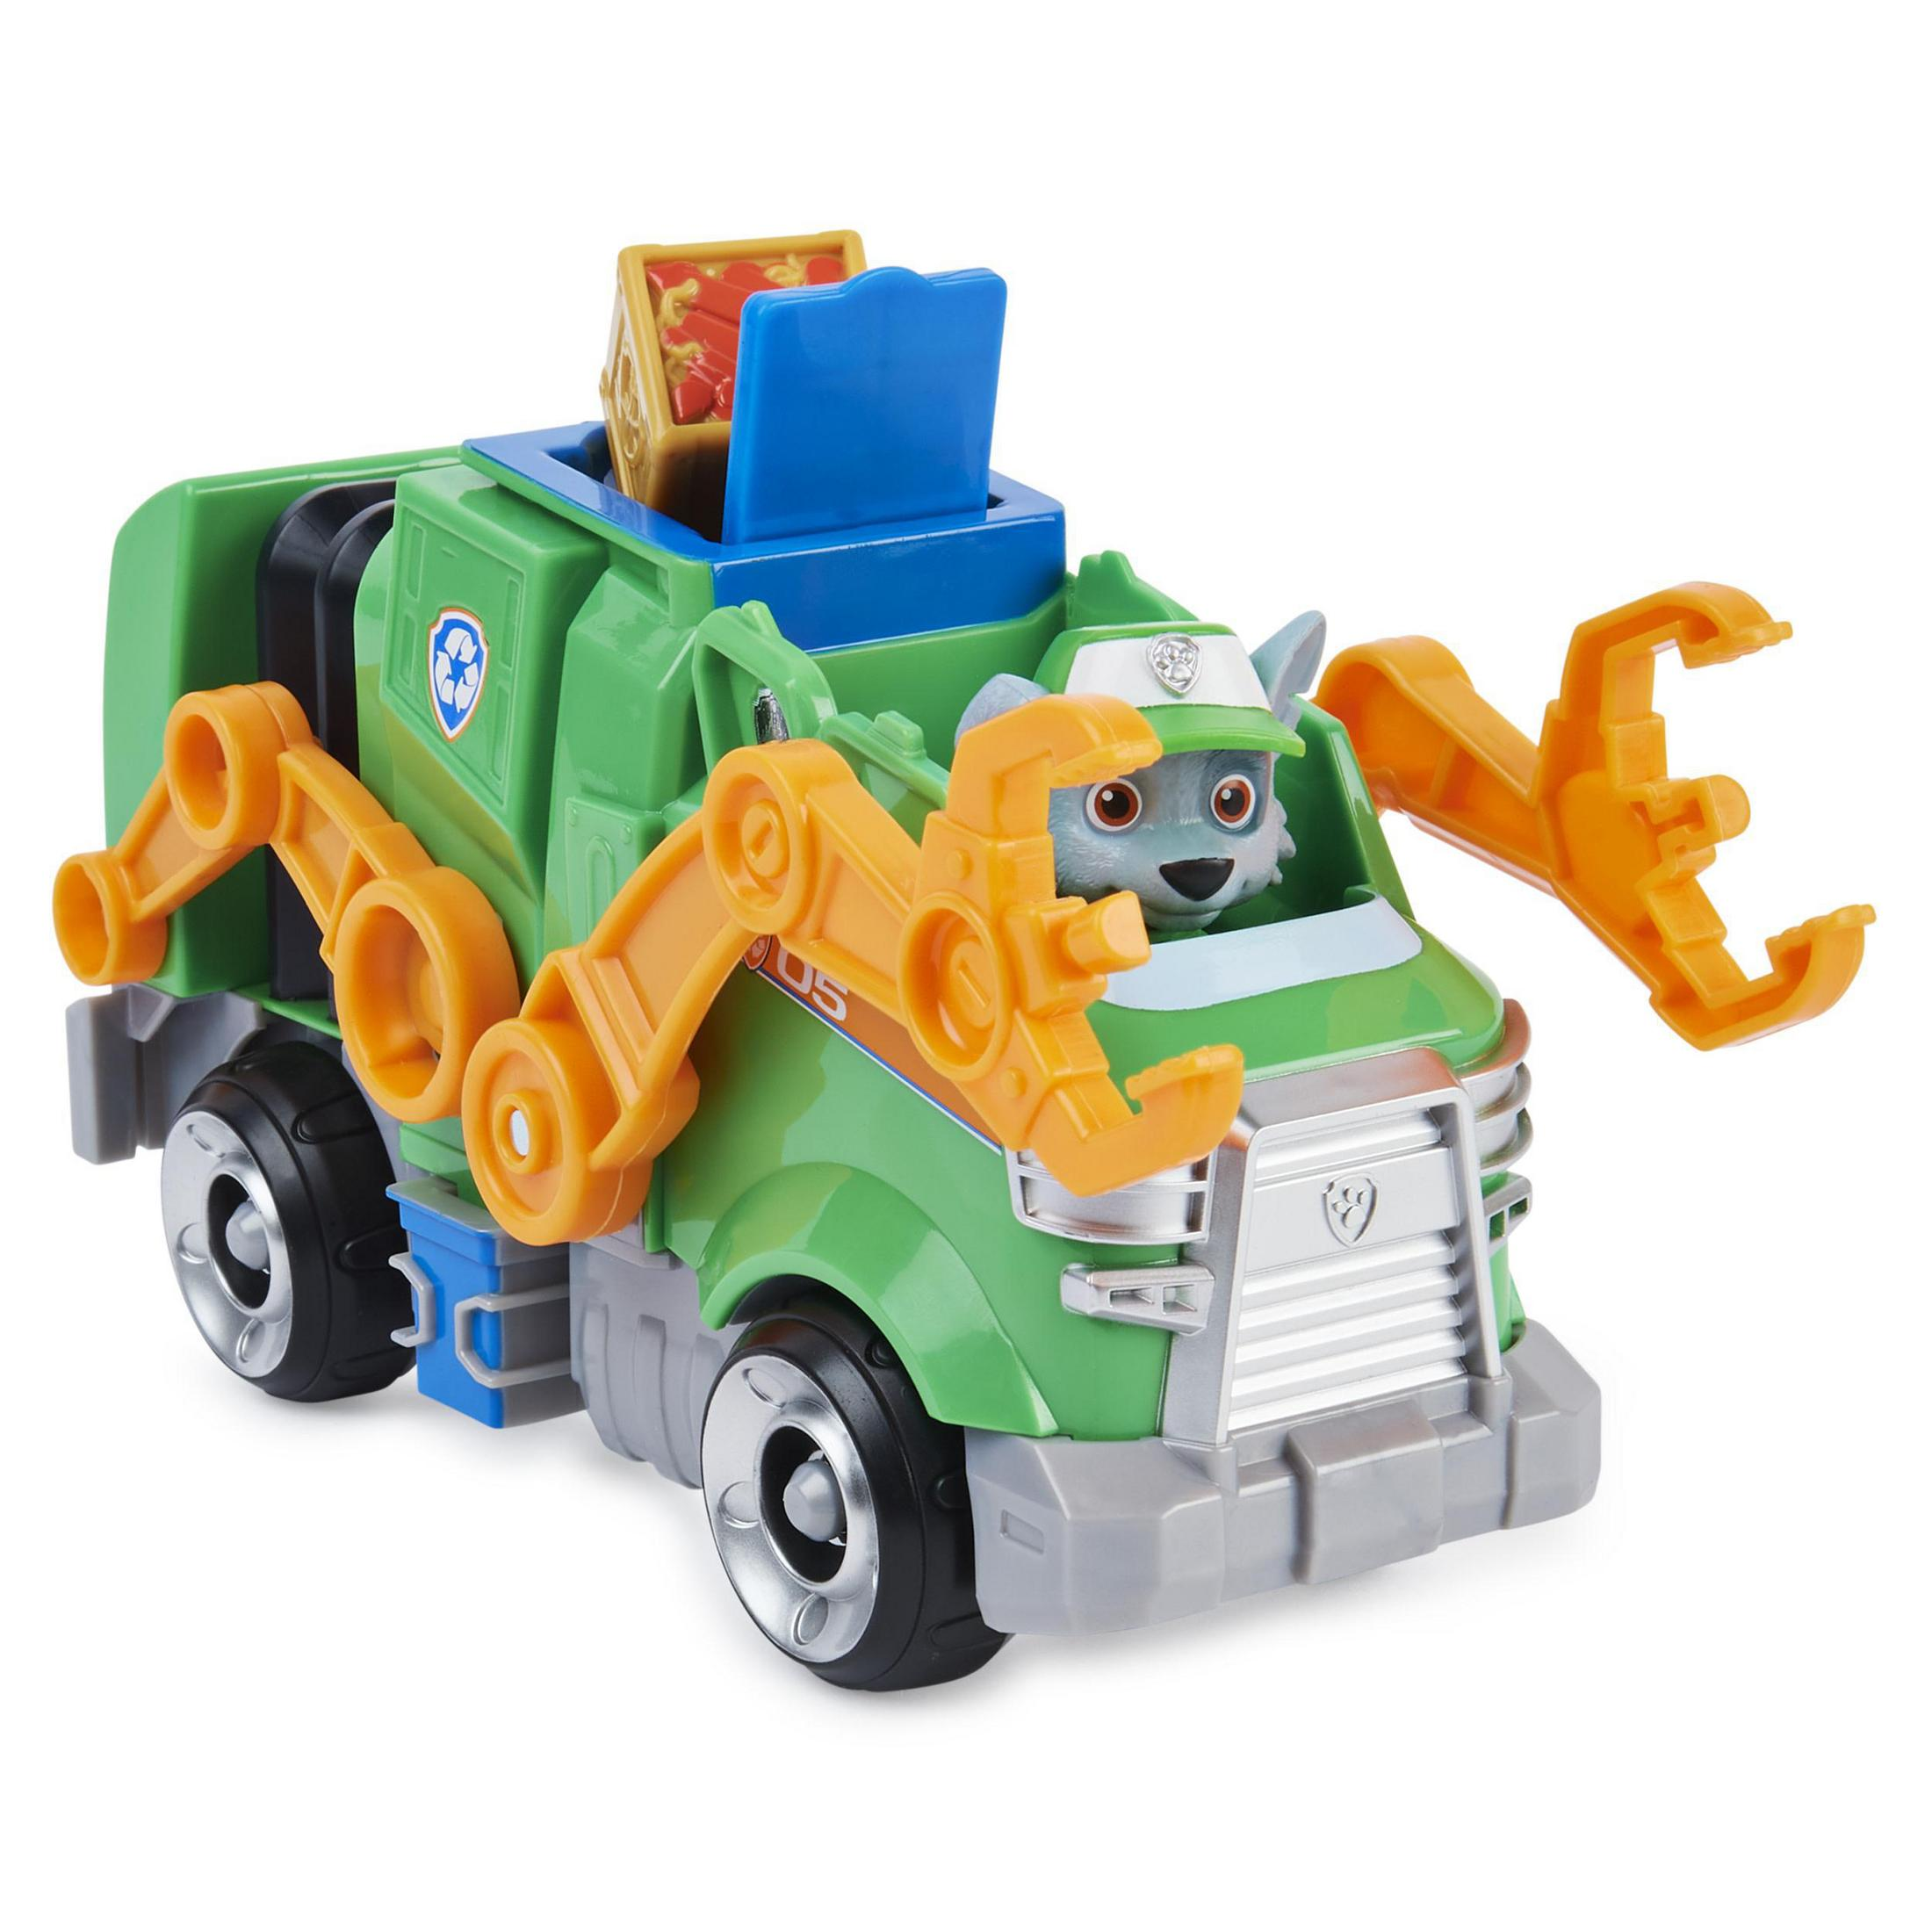 MASTER ROCKY SPIN PAW Mehrfarbig VEHICLE MOVIE BASIC Spielset 39882